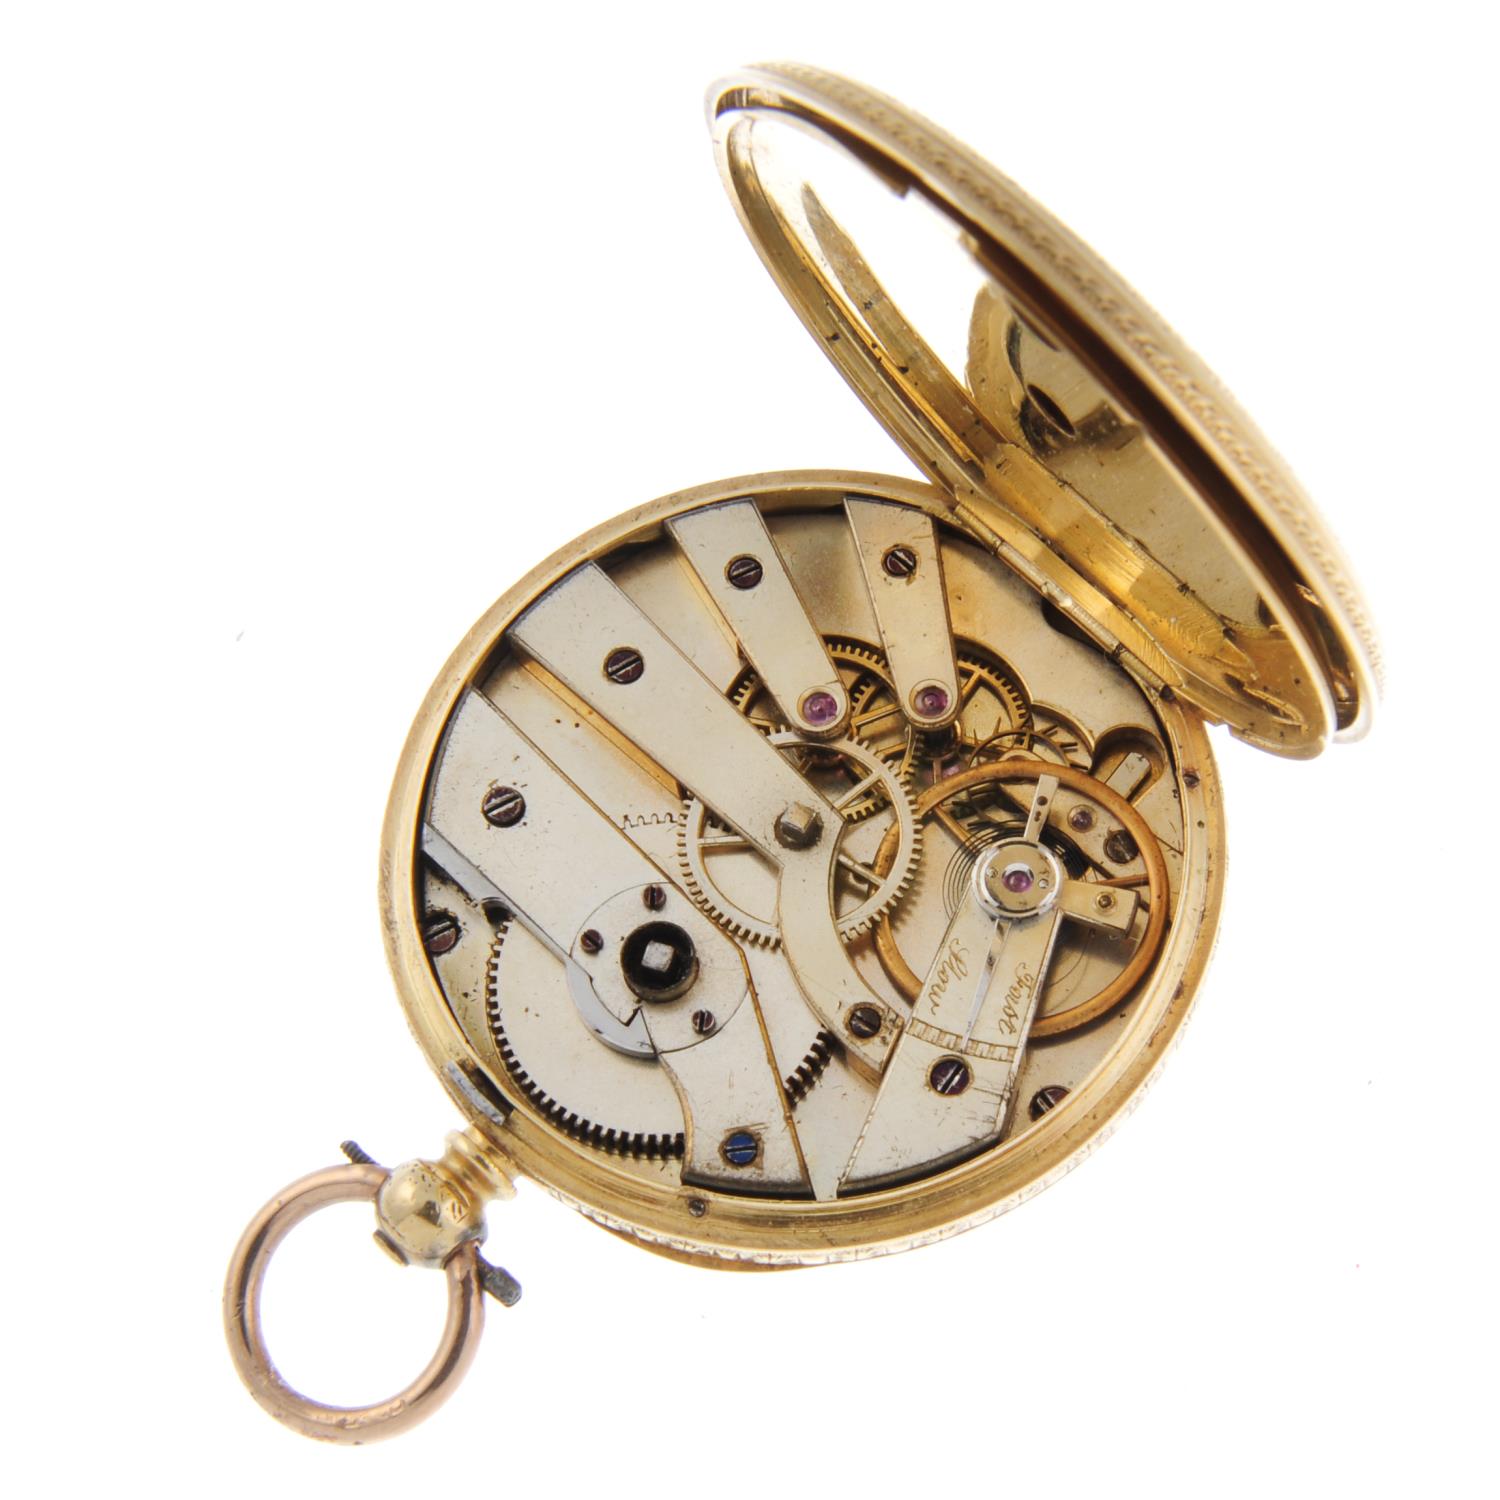 An open face pocket watch. - Image 3 of 3